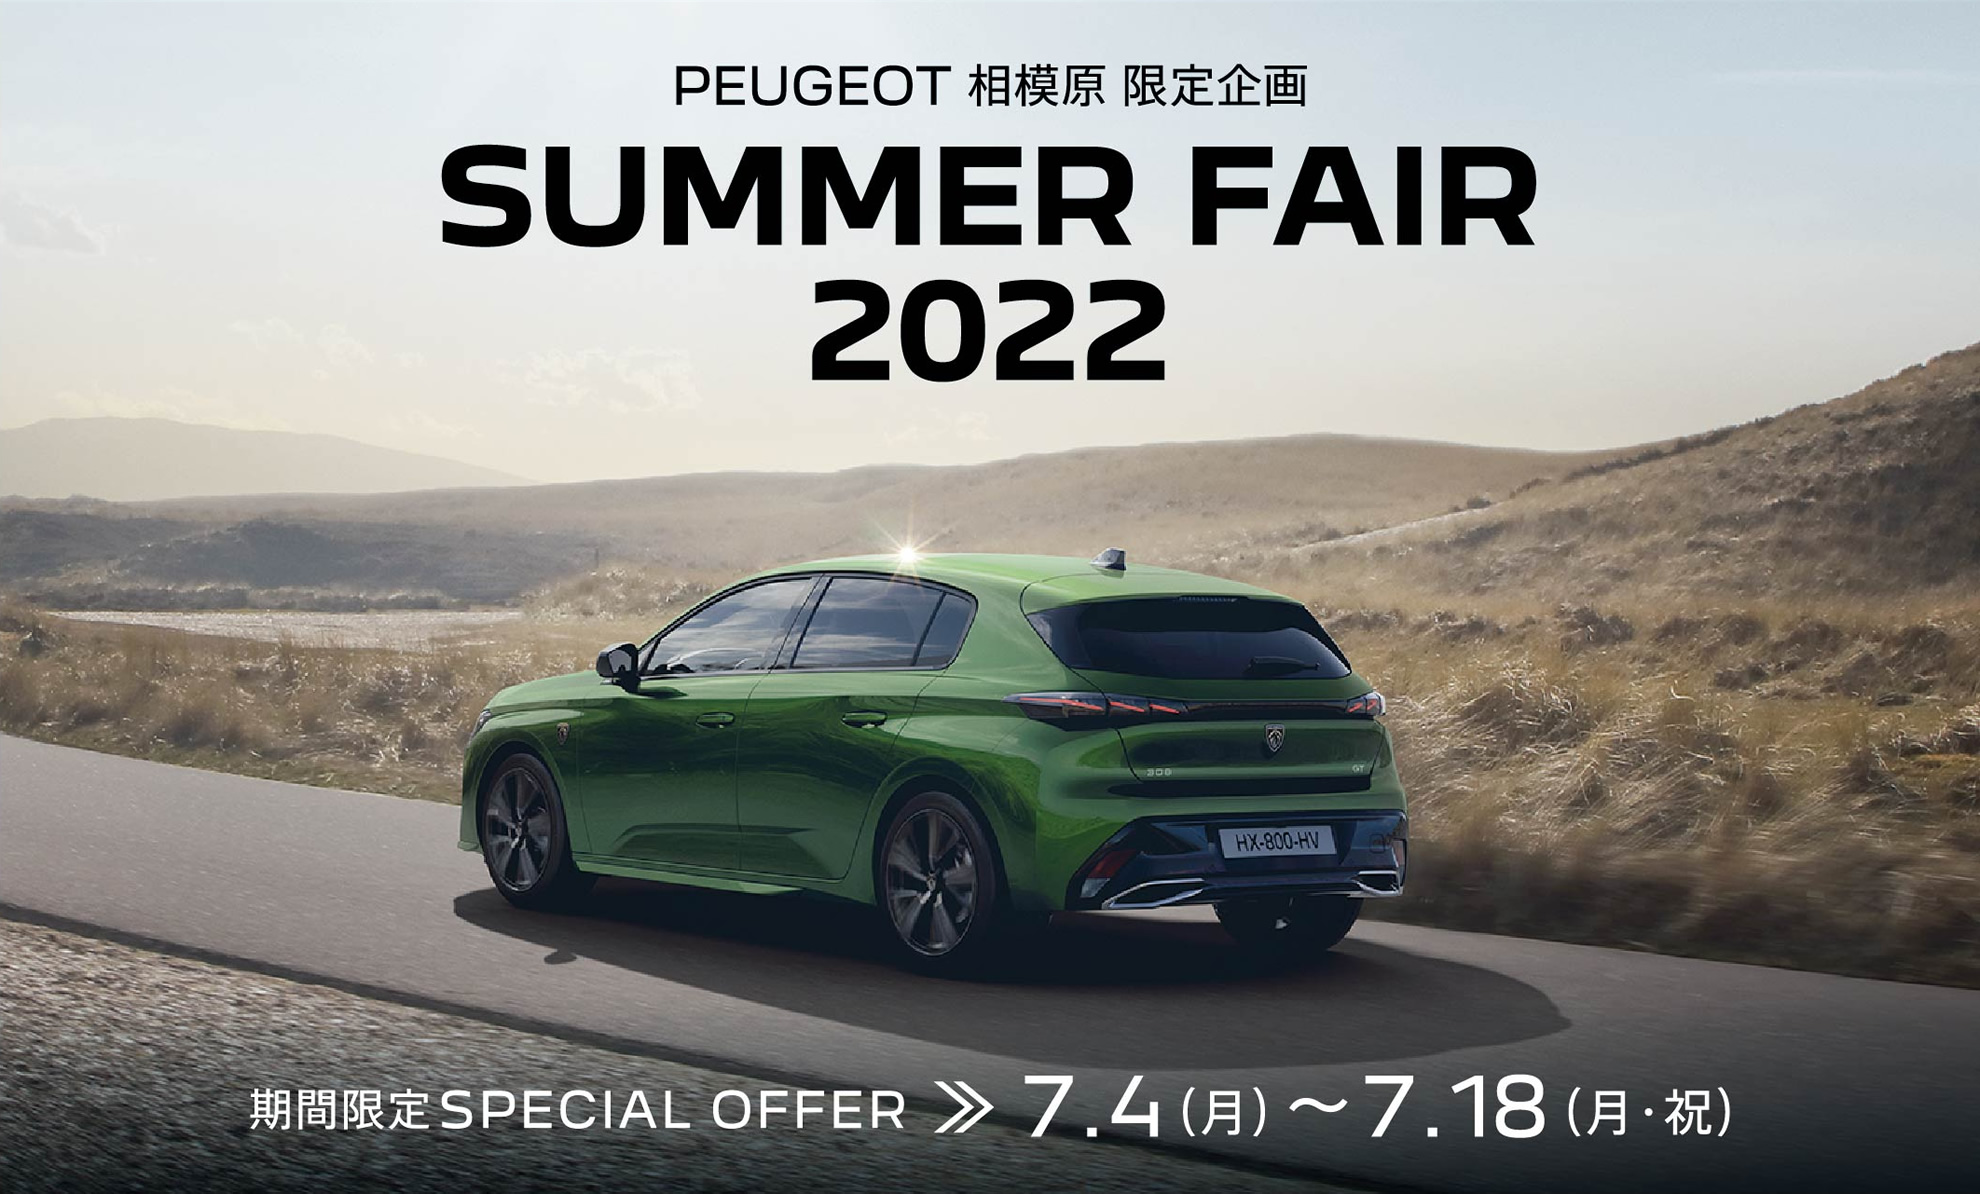 PEUGEOT 相模原限定企画 | SUMMER FAIR 2022 期間限定SPECIAL OFFER 7.4～7.18